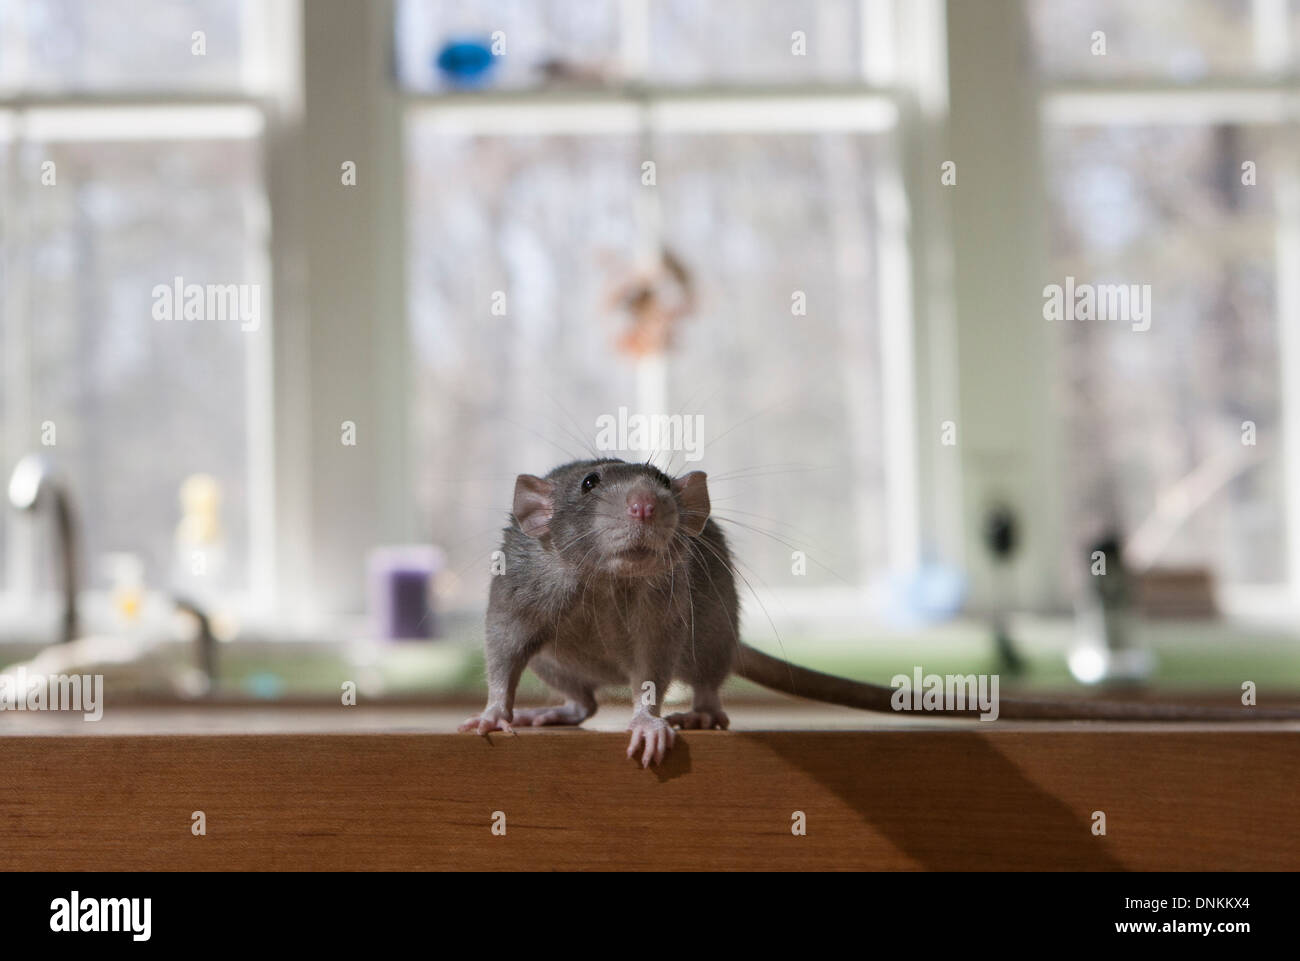 Cute rat in a kitchen Stock Photo